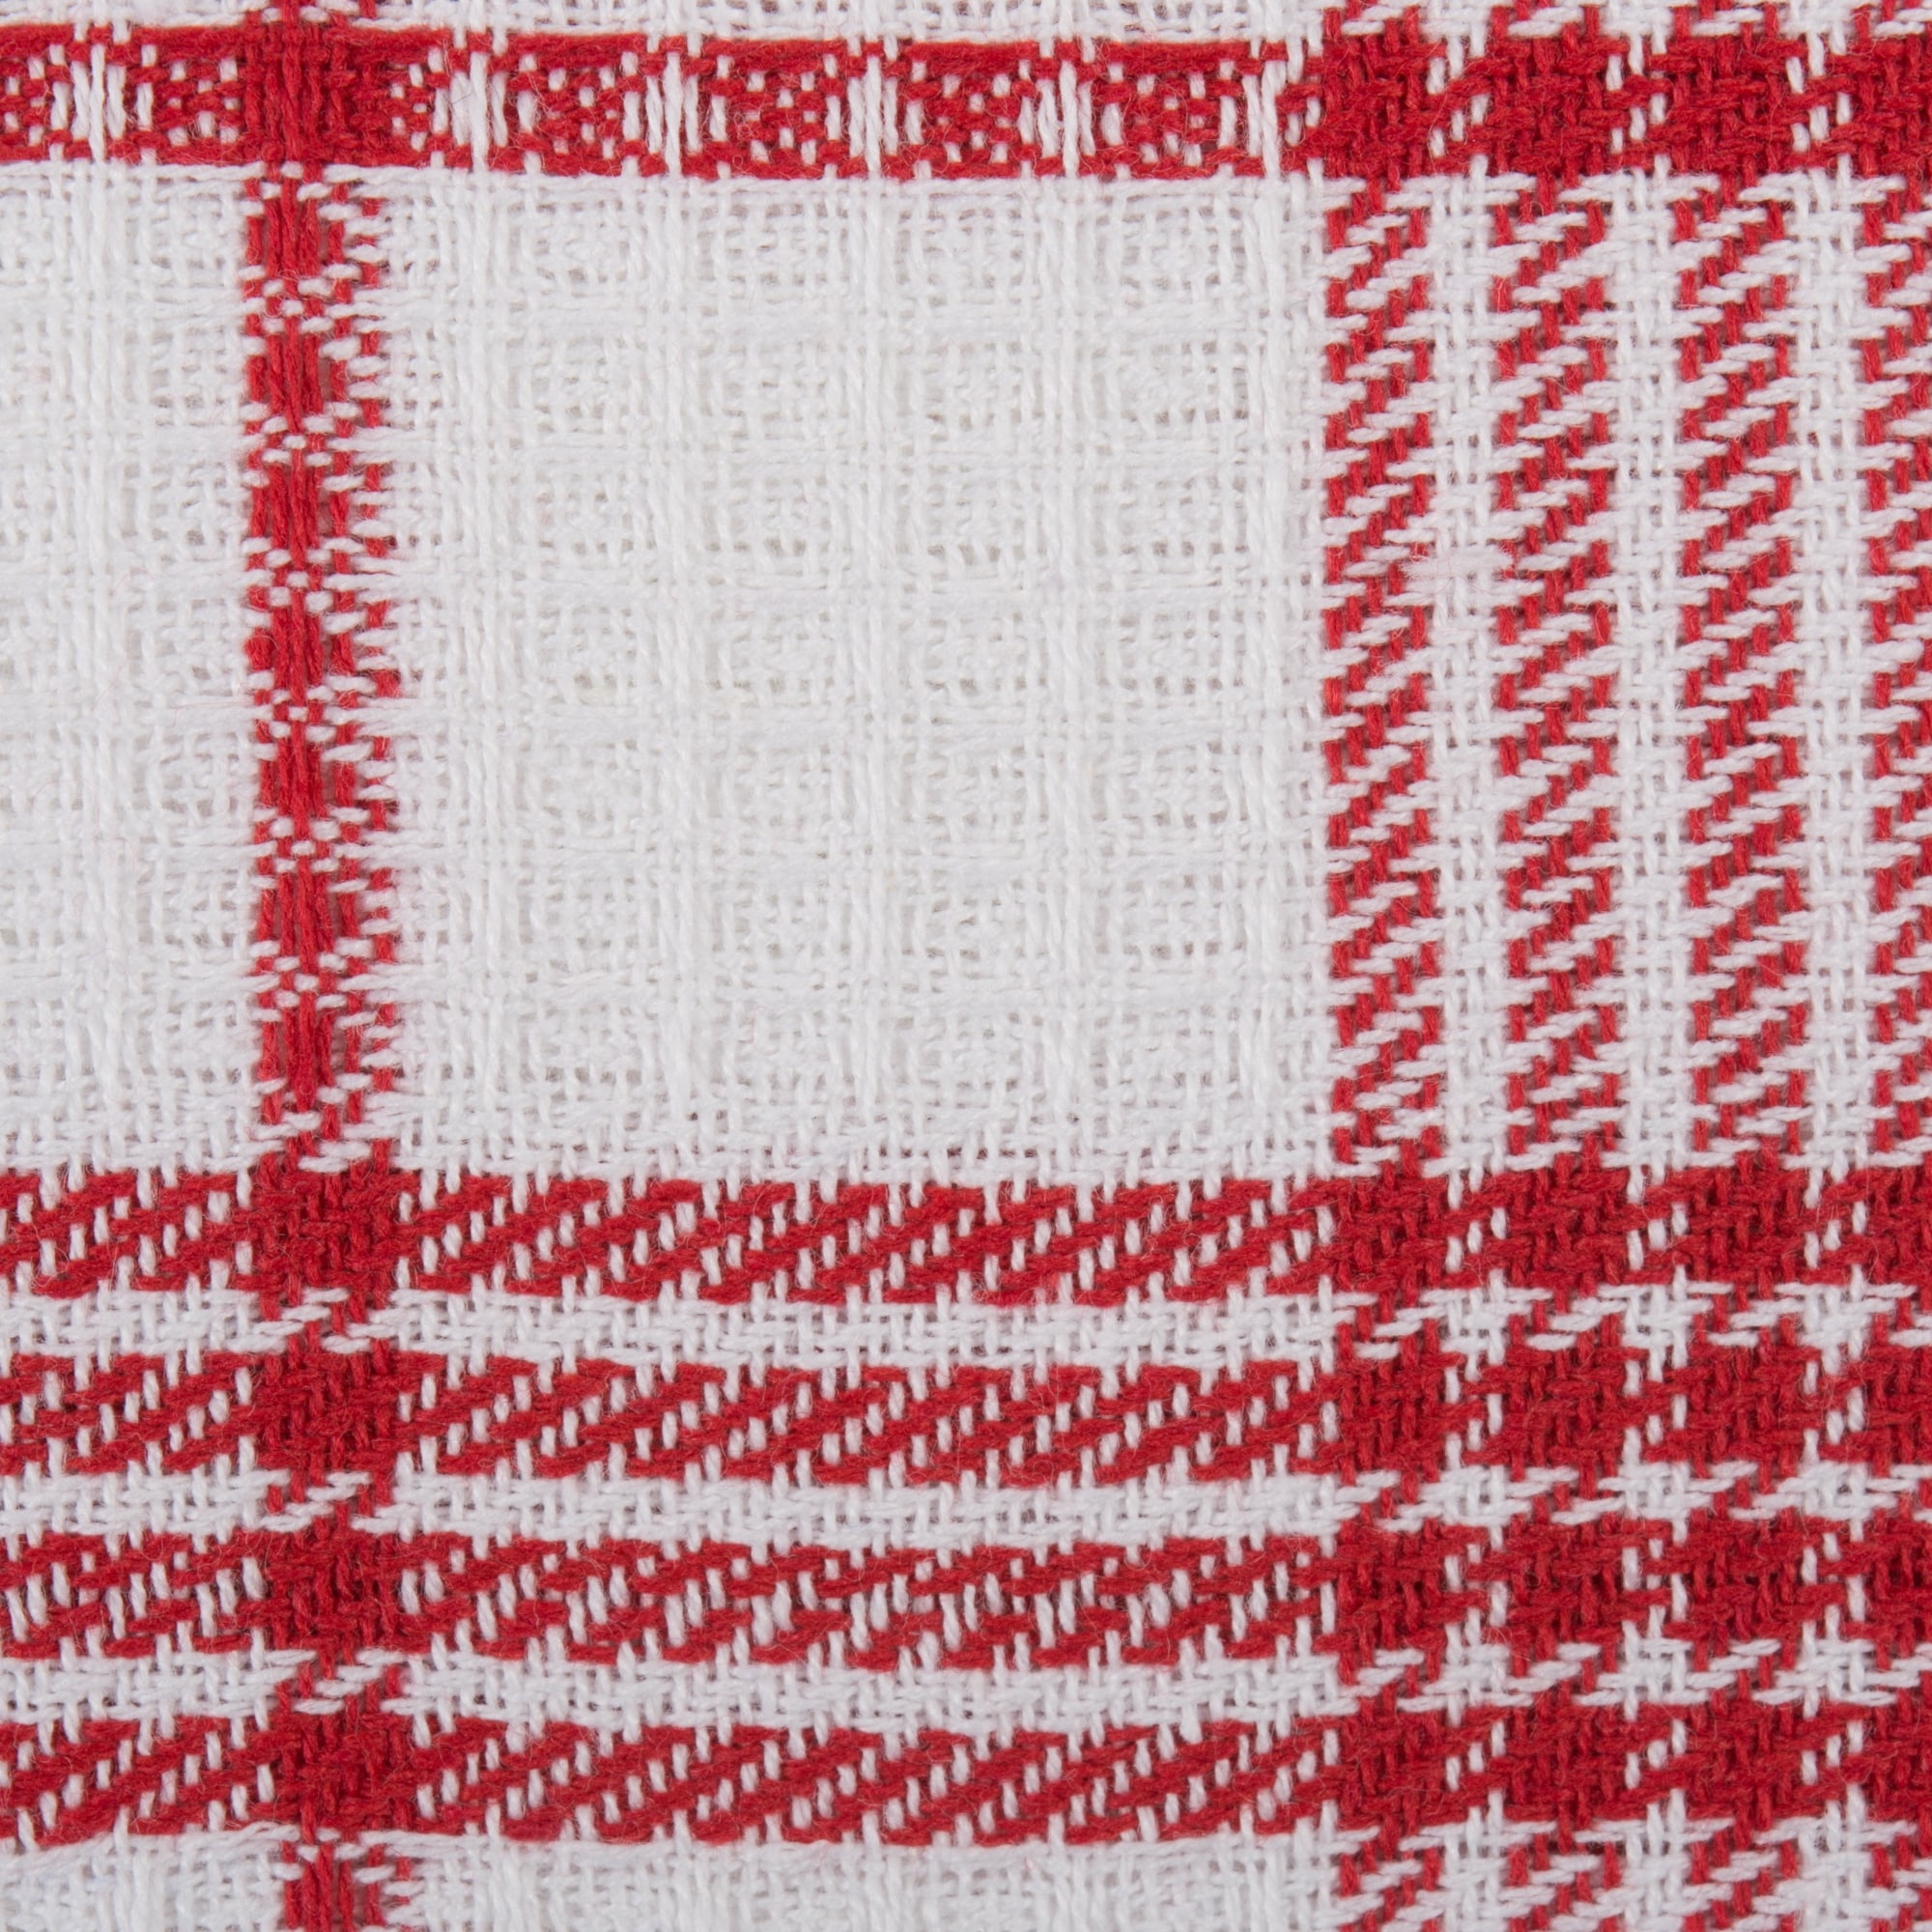 https://ak1.ostkcdn.com/images/products/is/images/direct/1945540fd812251ad00c805a273c7f5d8dd2e664/J%26M-Red-Waffle-Weave-Dishcloth-%28Set-of-12%29.jpg